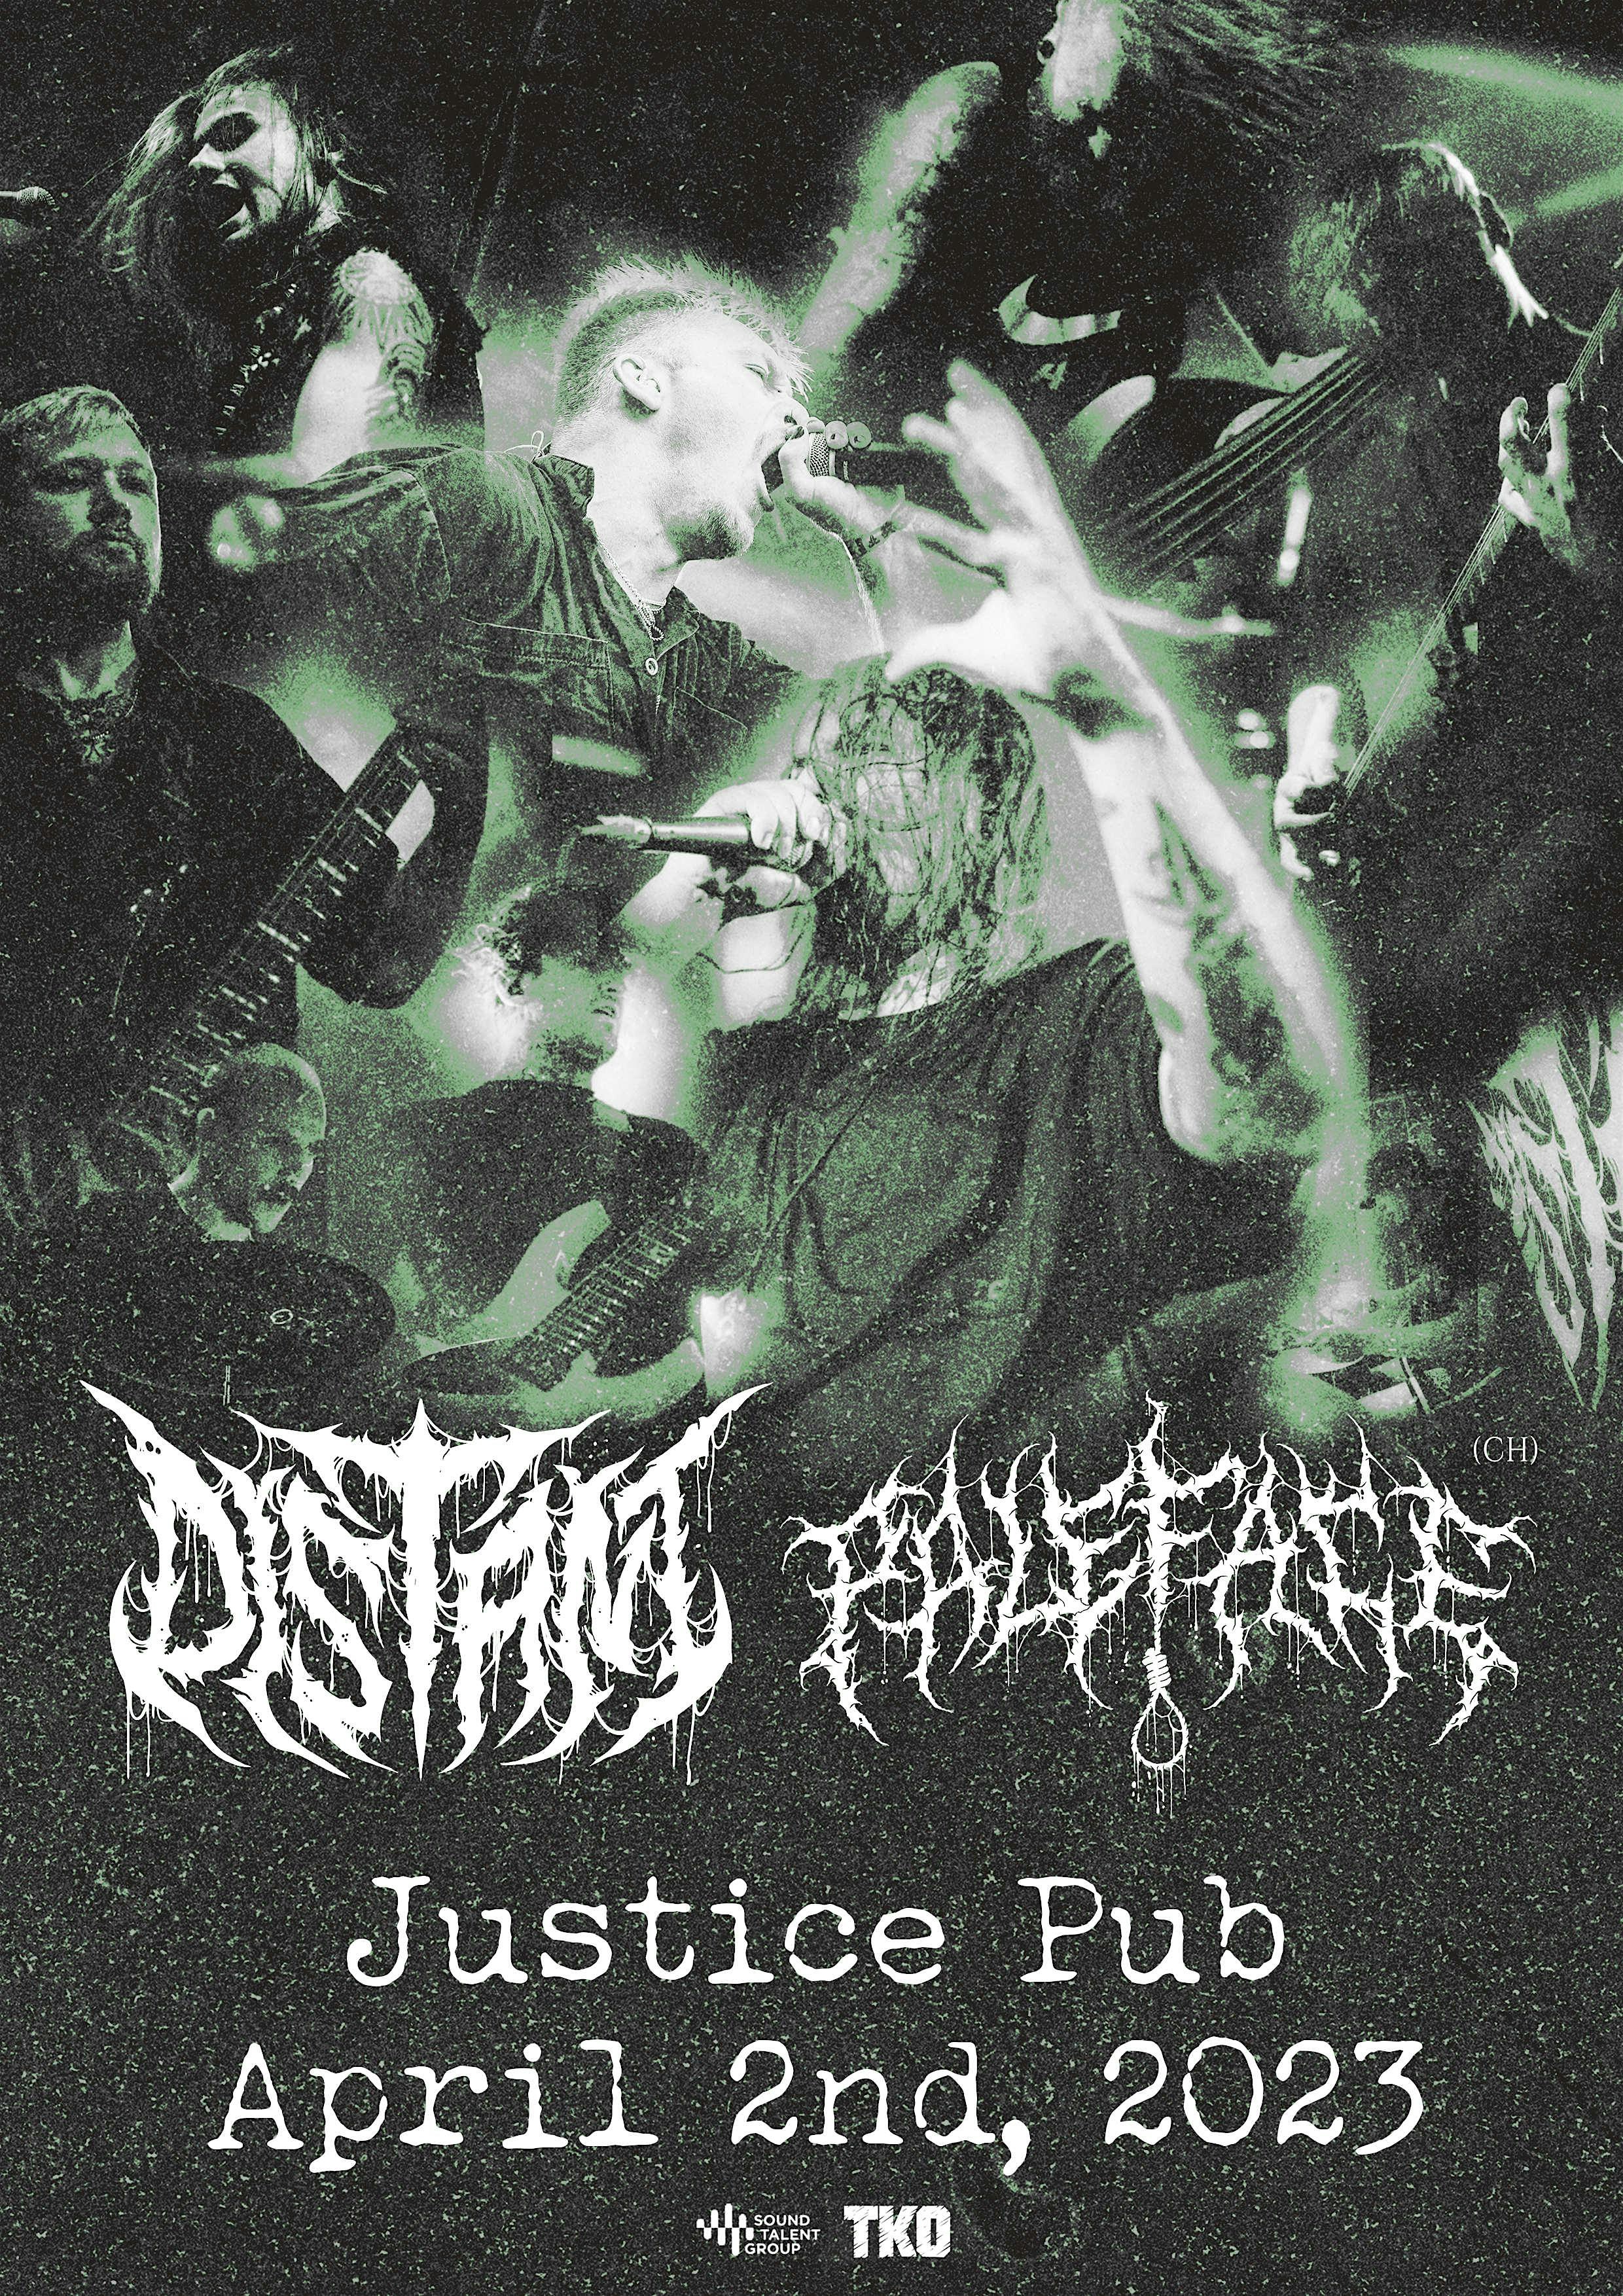 Distant, Paleface (CH), and More in Jacksonville at Justice Pub